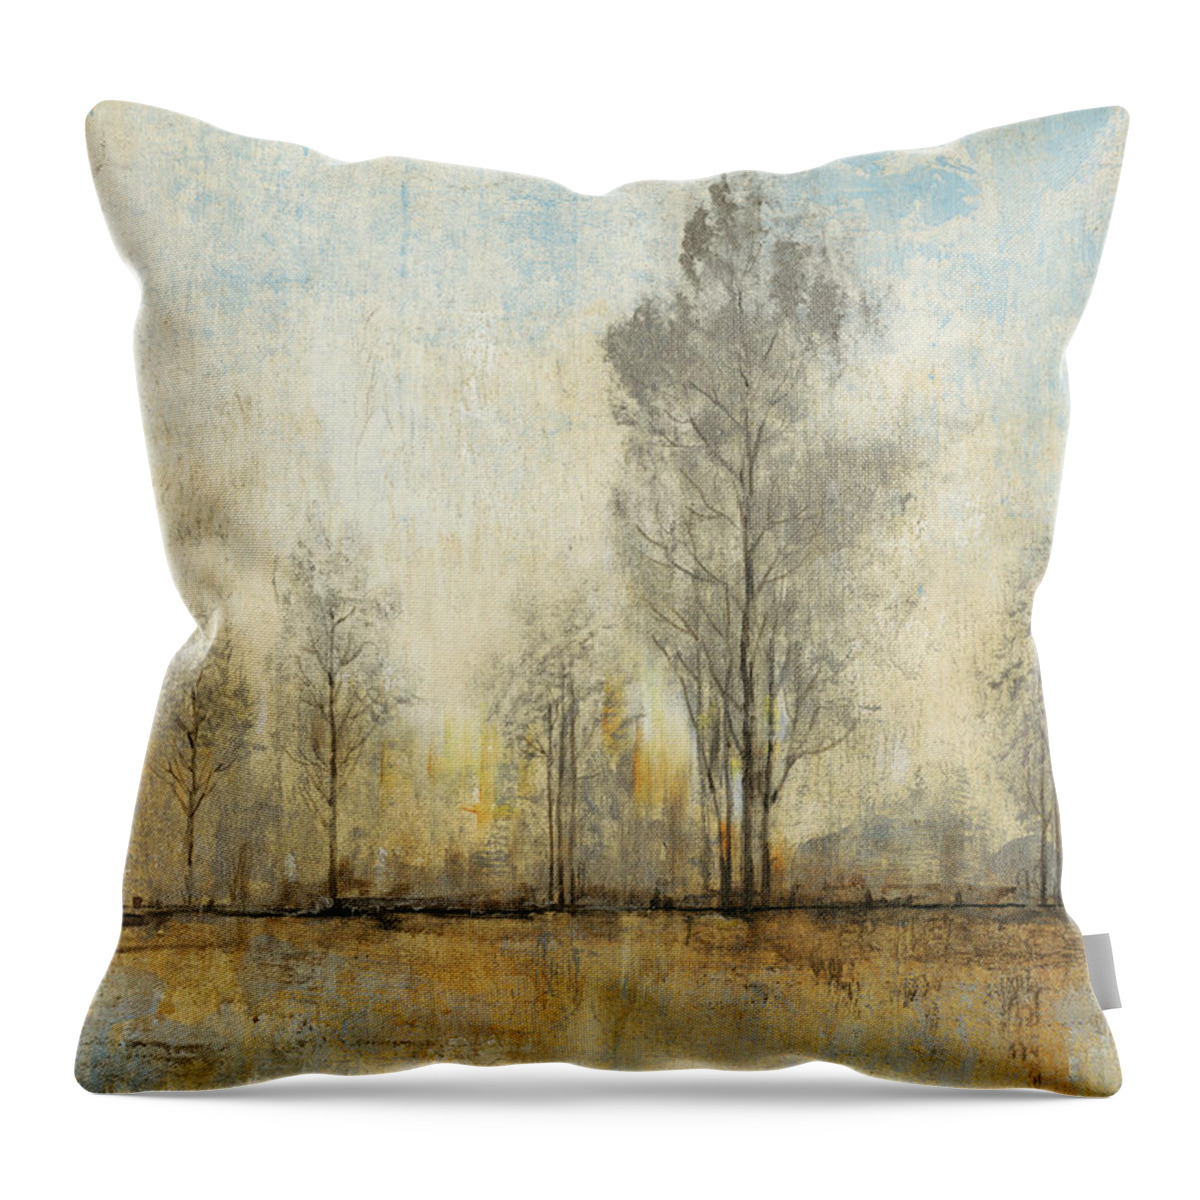 Landscapes Throw Pillow featuring the painting Quiet Nature I by Tim Otoole